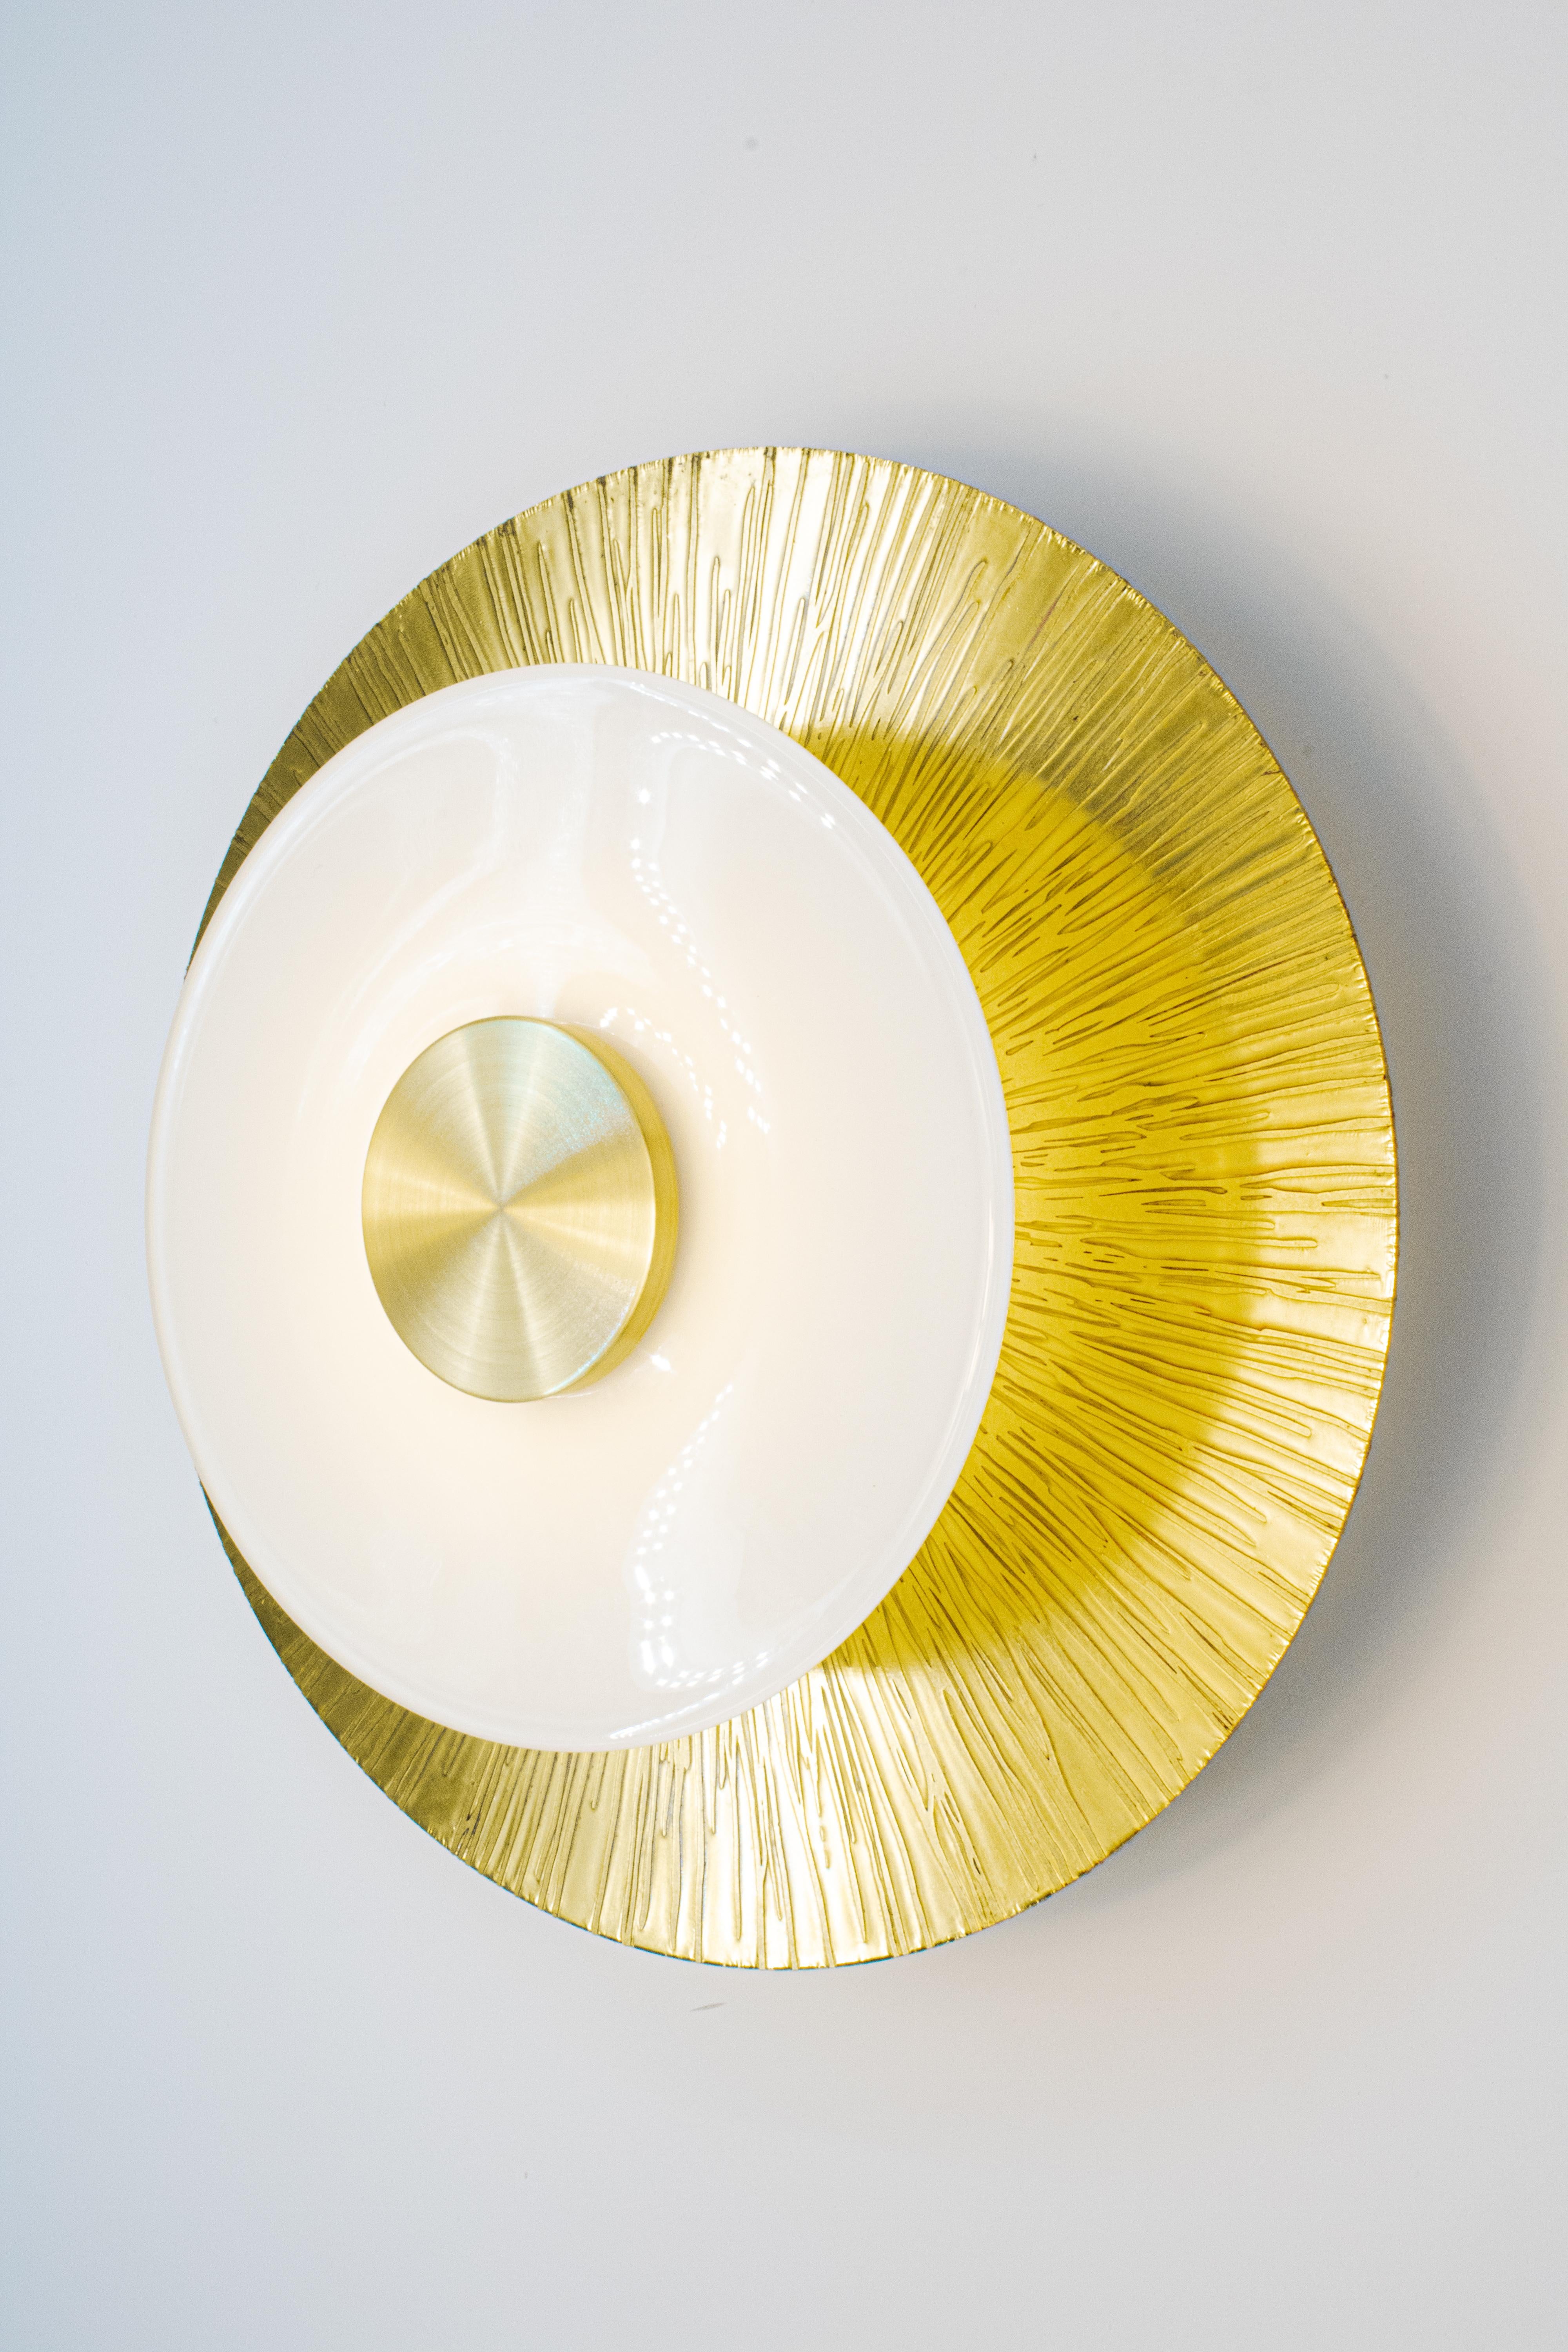 Klein Sconce in Ginkgo Etch in Two Tone Brass Finish with White Glass Rondelle For Sale 1